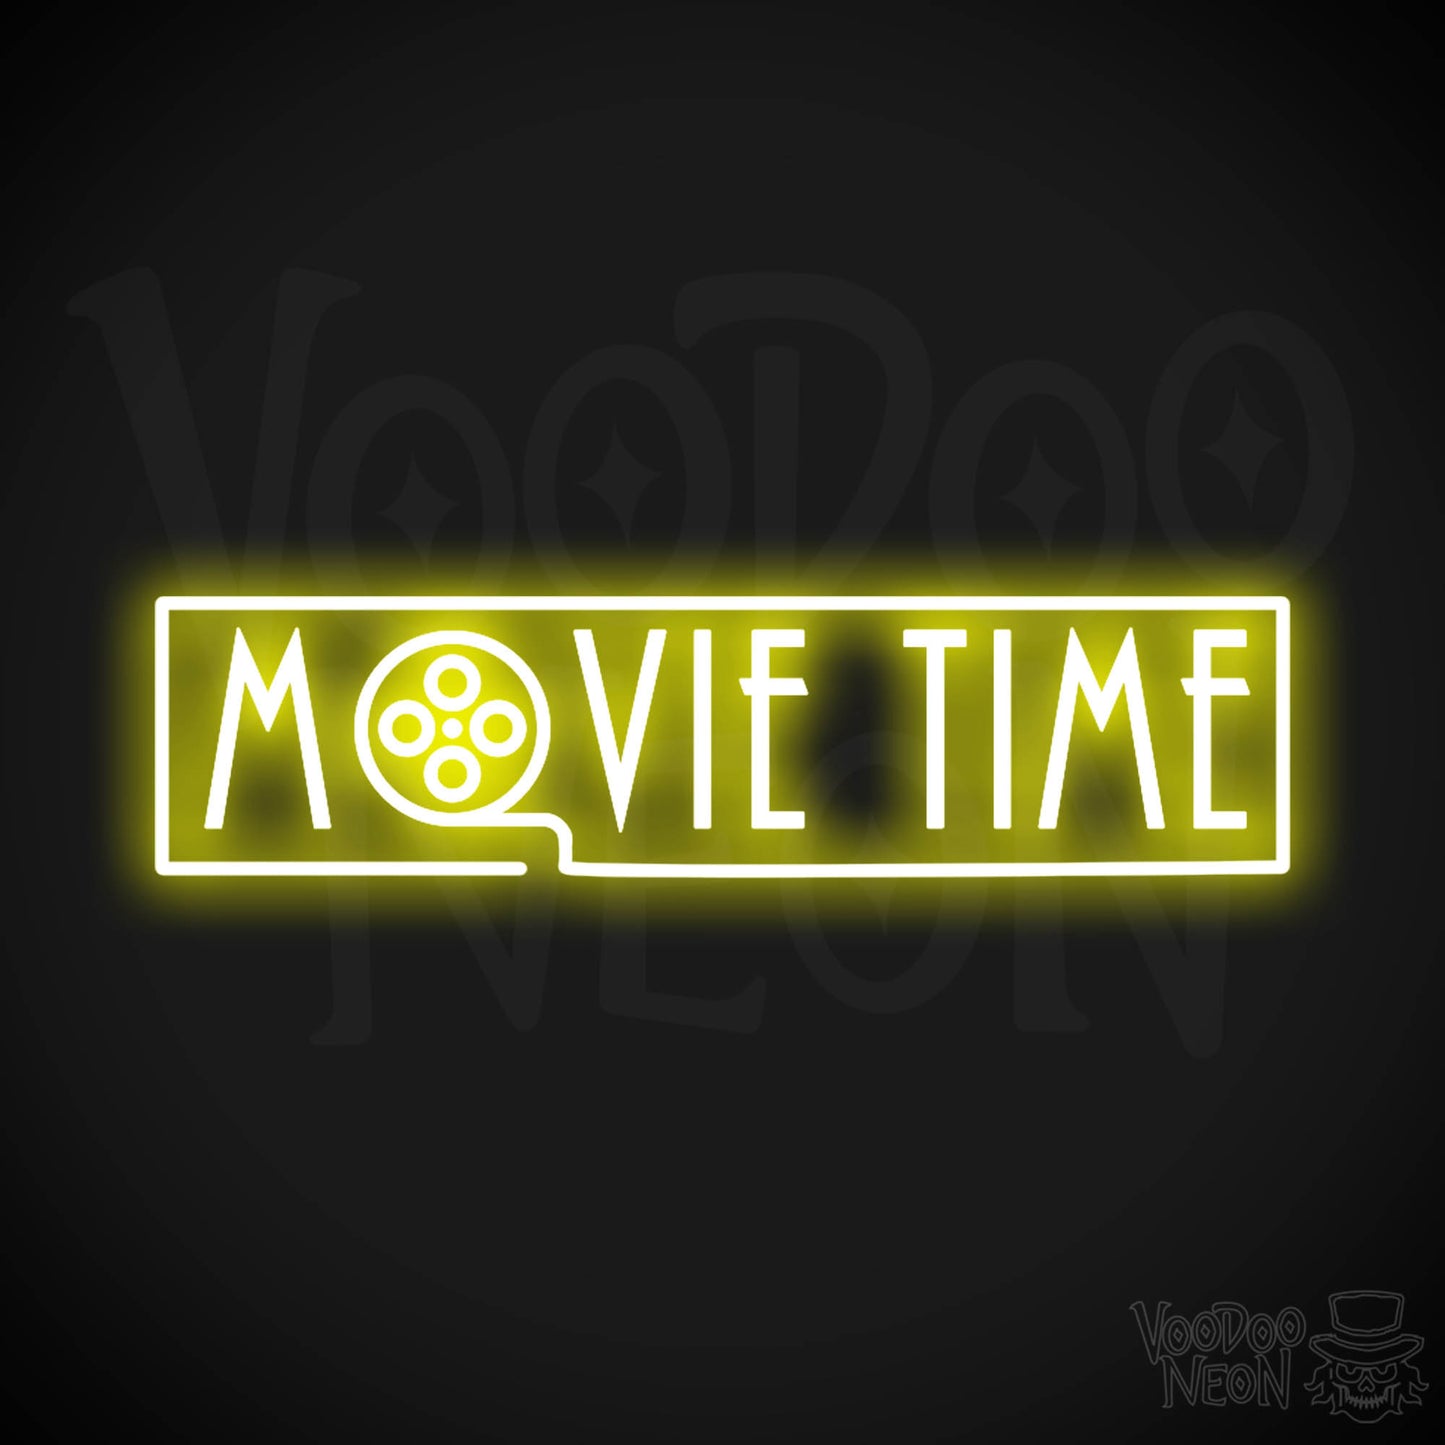 Movie Time Neon Sign - Neon Movie Time Sign - Color Yellow